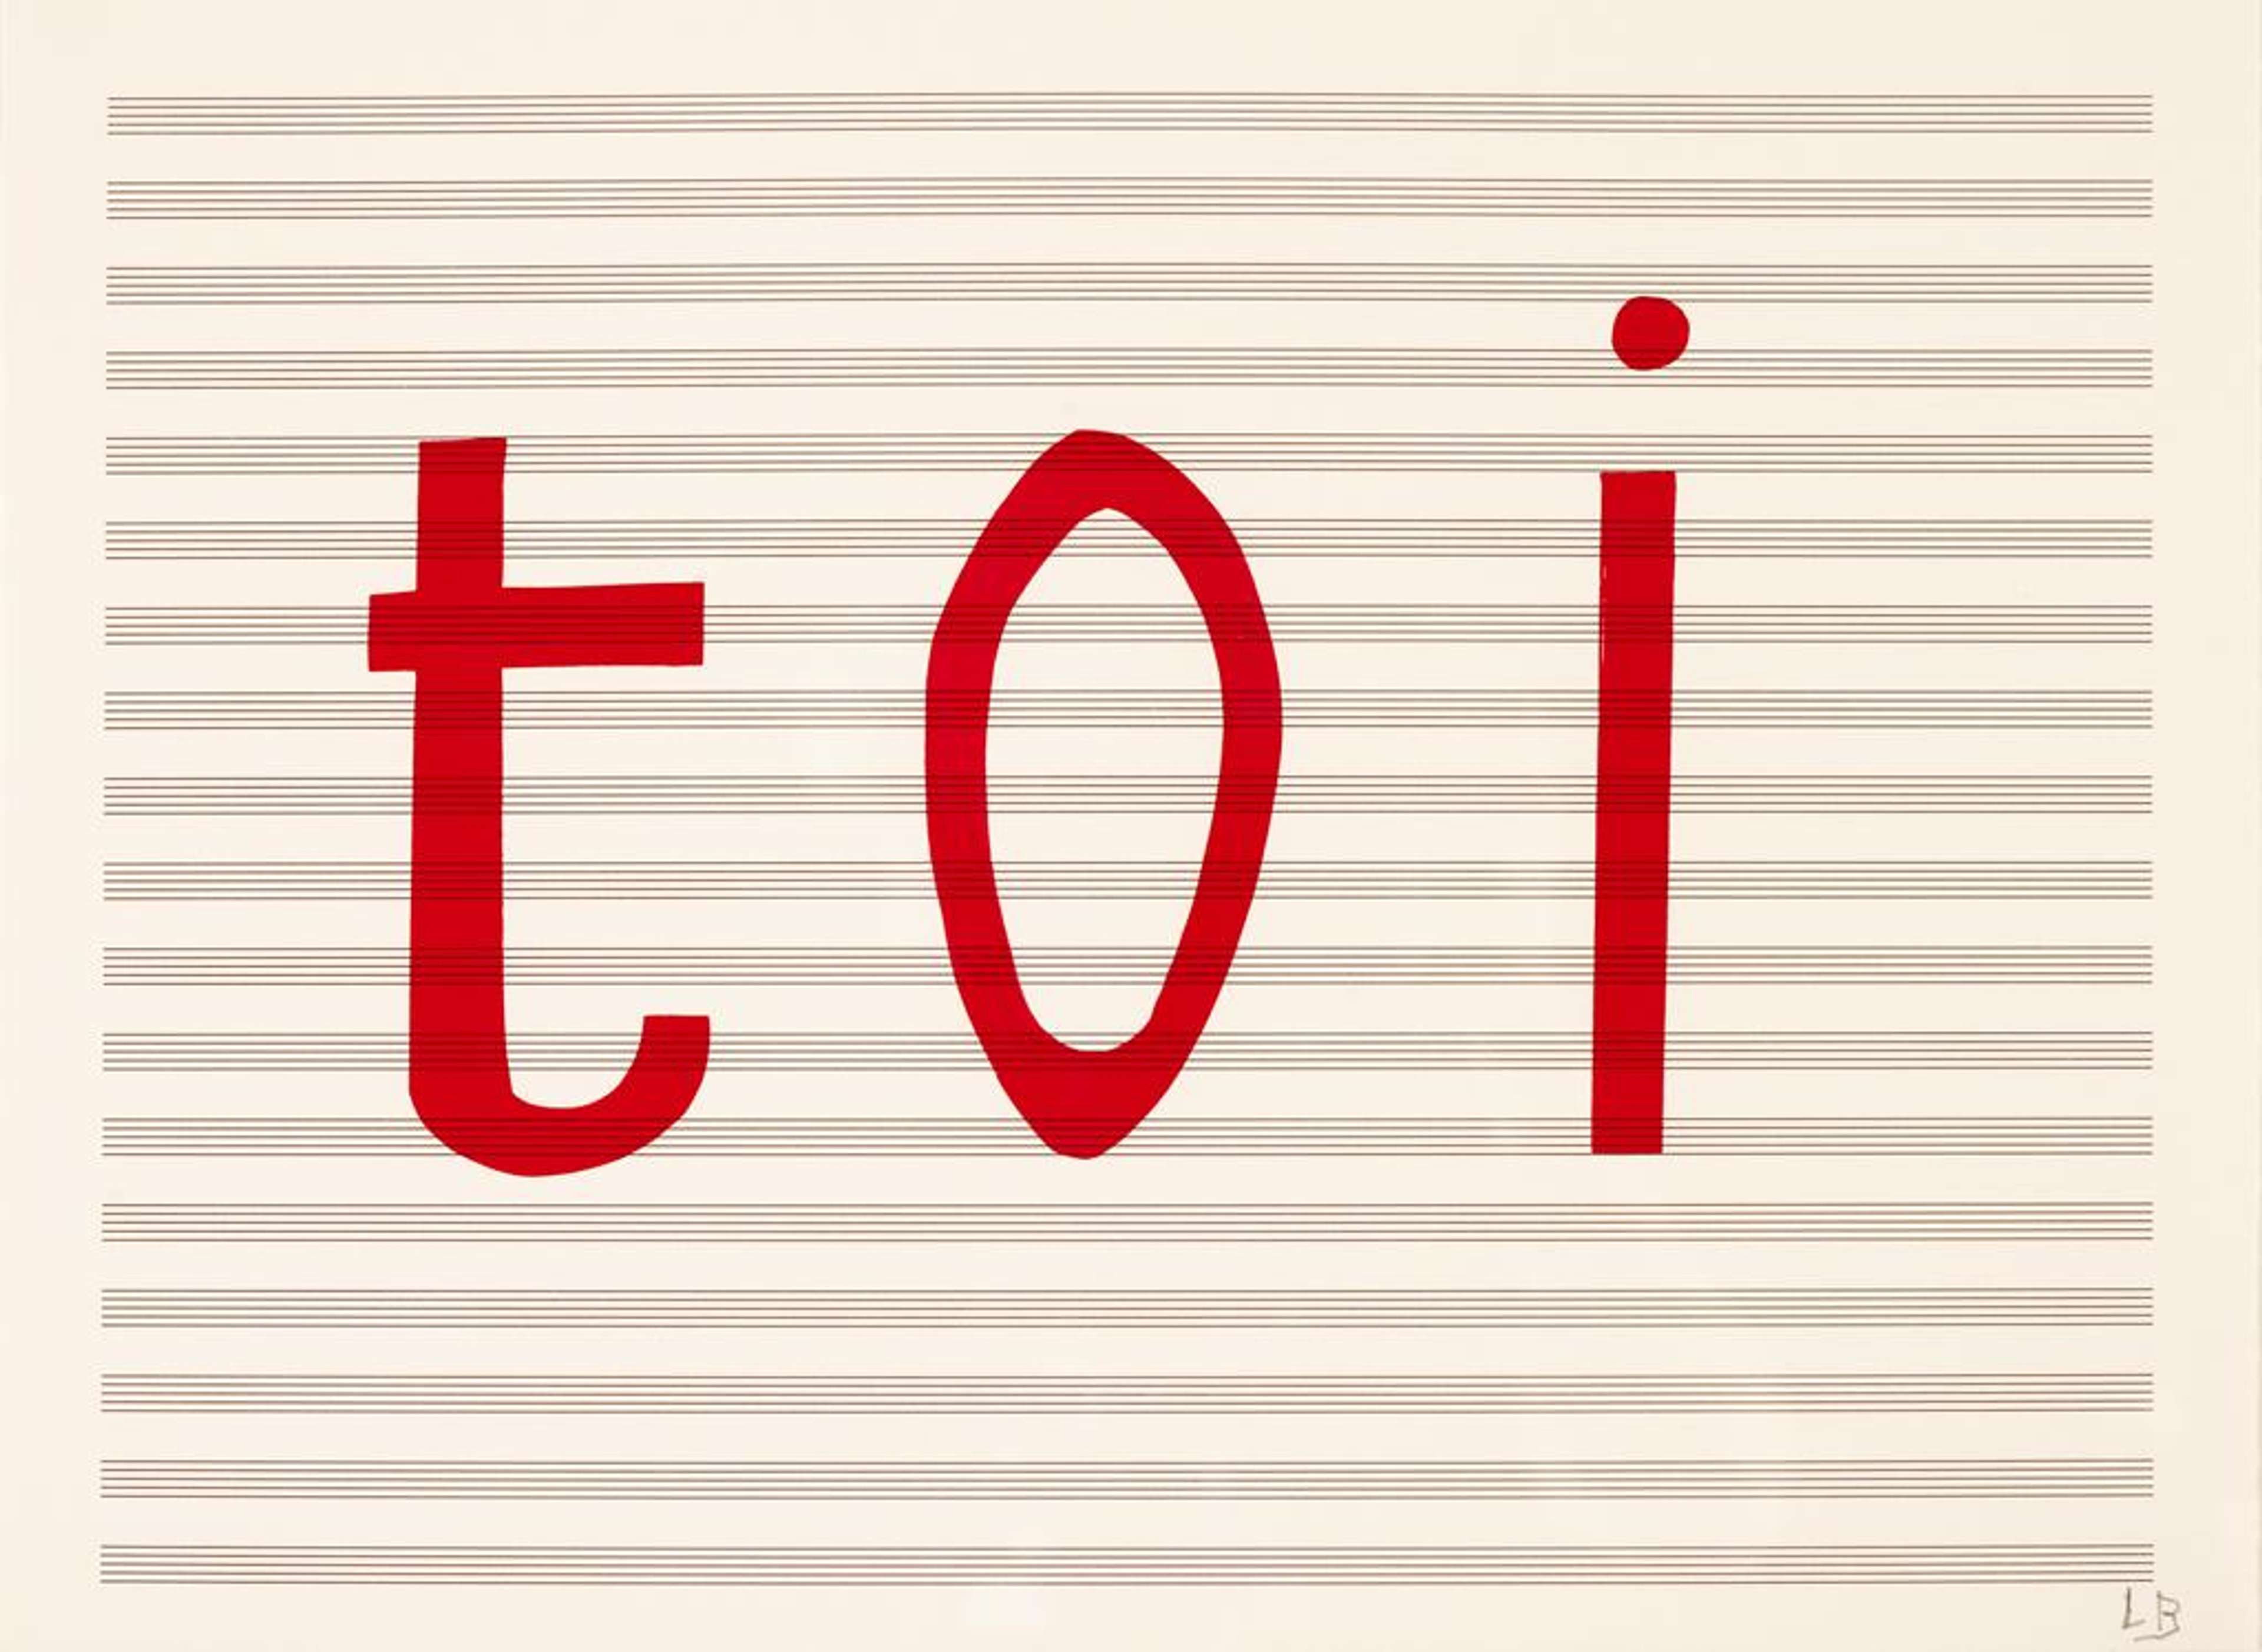 Louise Bourgeois’ Untitled #2. A screenprint of the word “toi” in red against a sheet of horizontal lines.